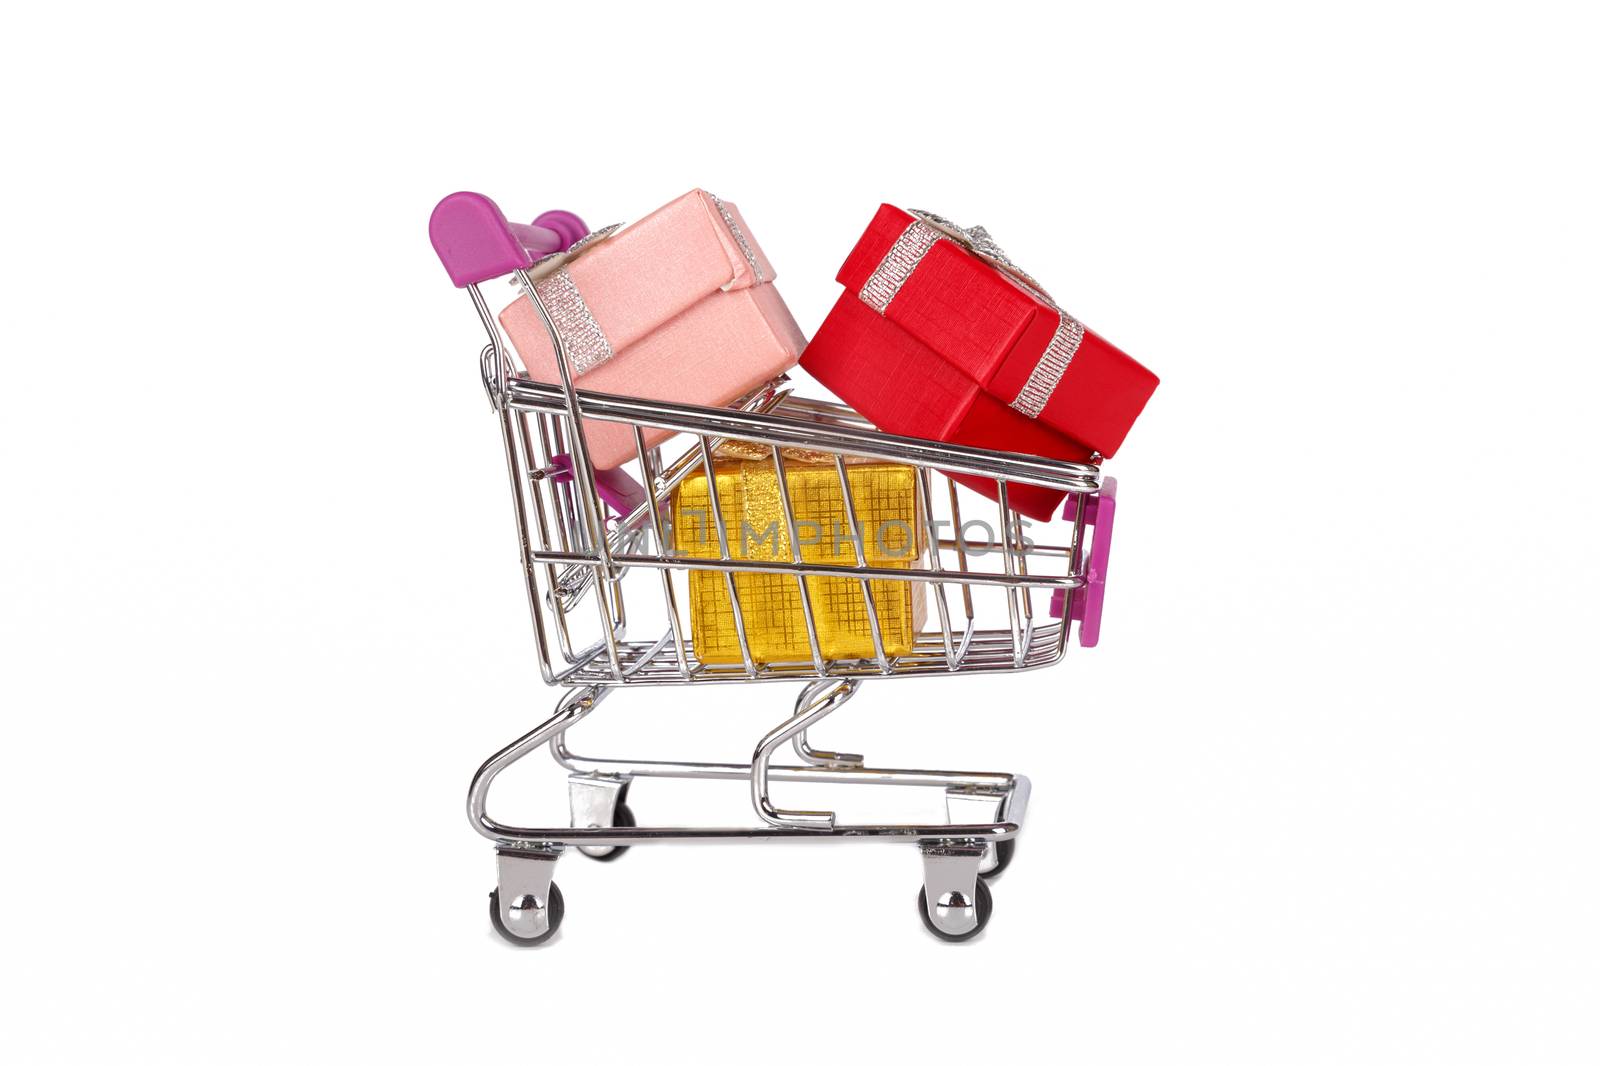 Side view of shopping card or trolley with colorful gift boxes isolated on white background.